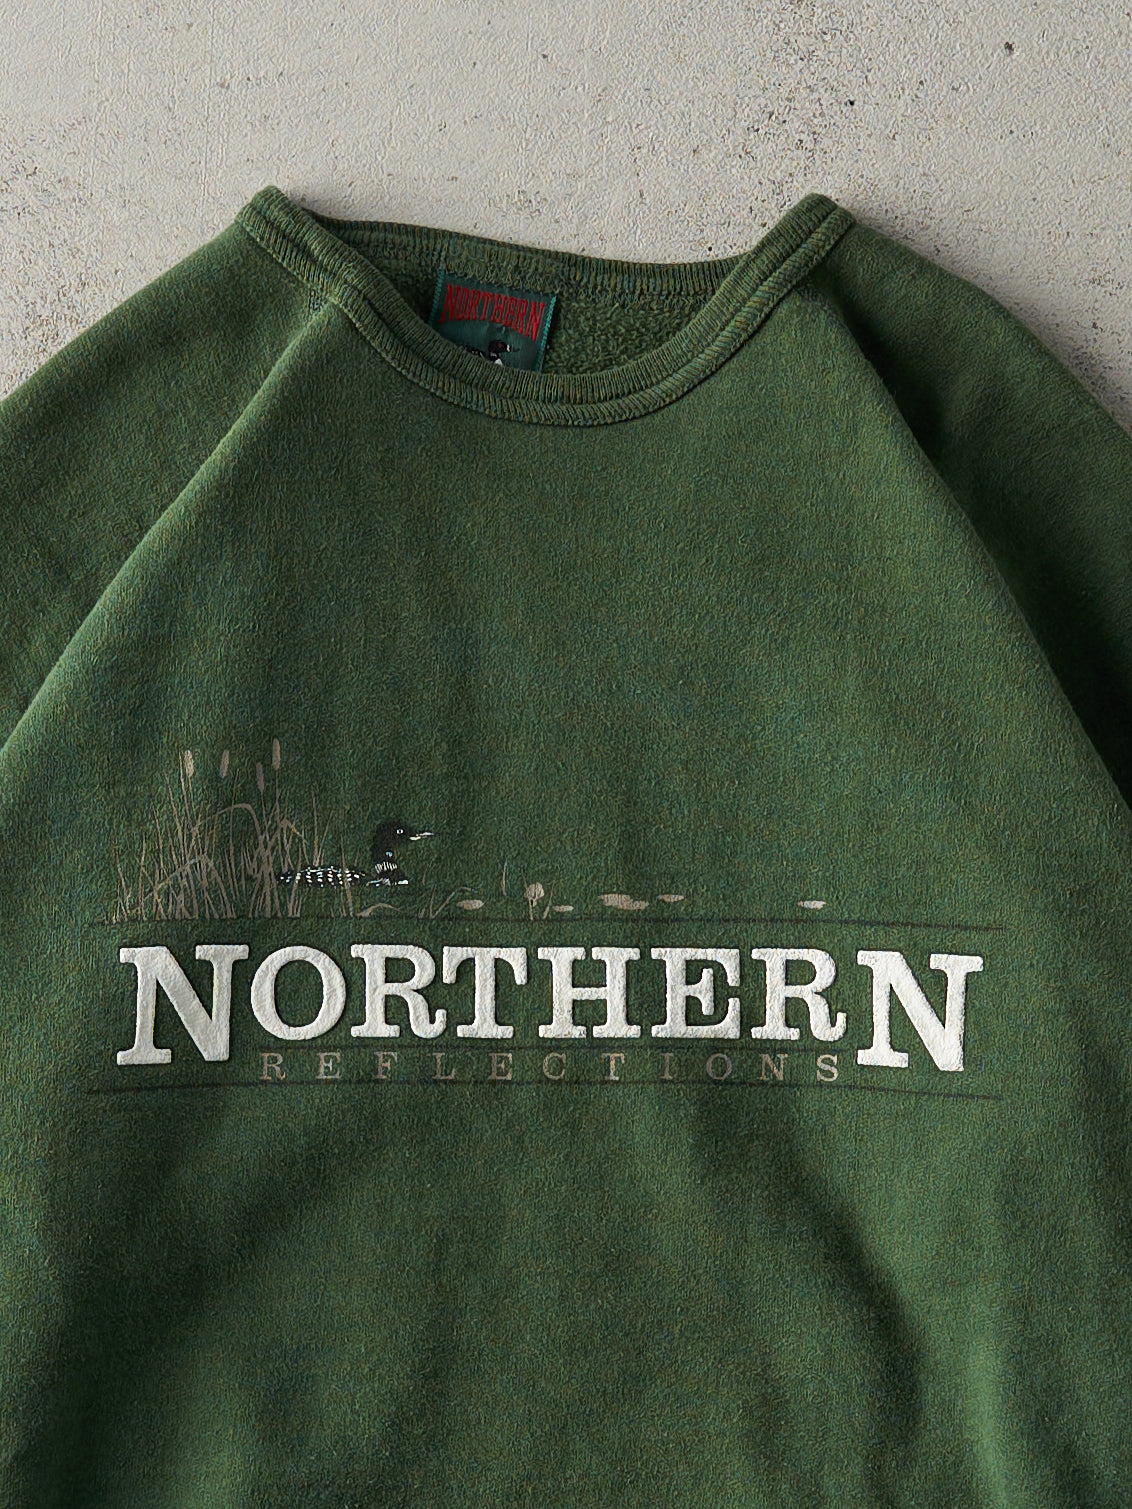 Vintage 90s Sun Faded Green Northern Reflections Crewneck (M/L)